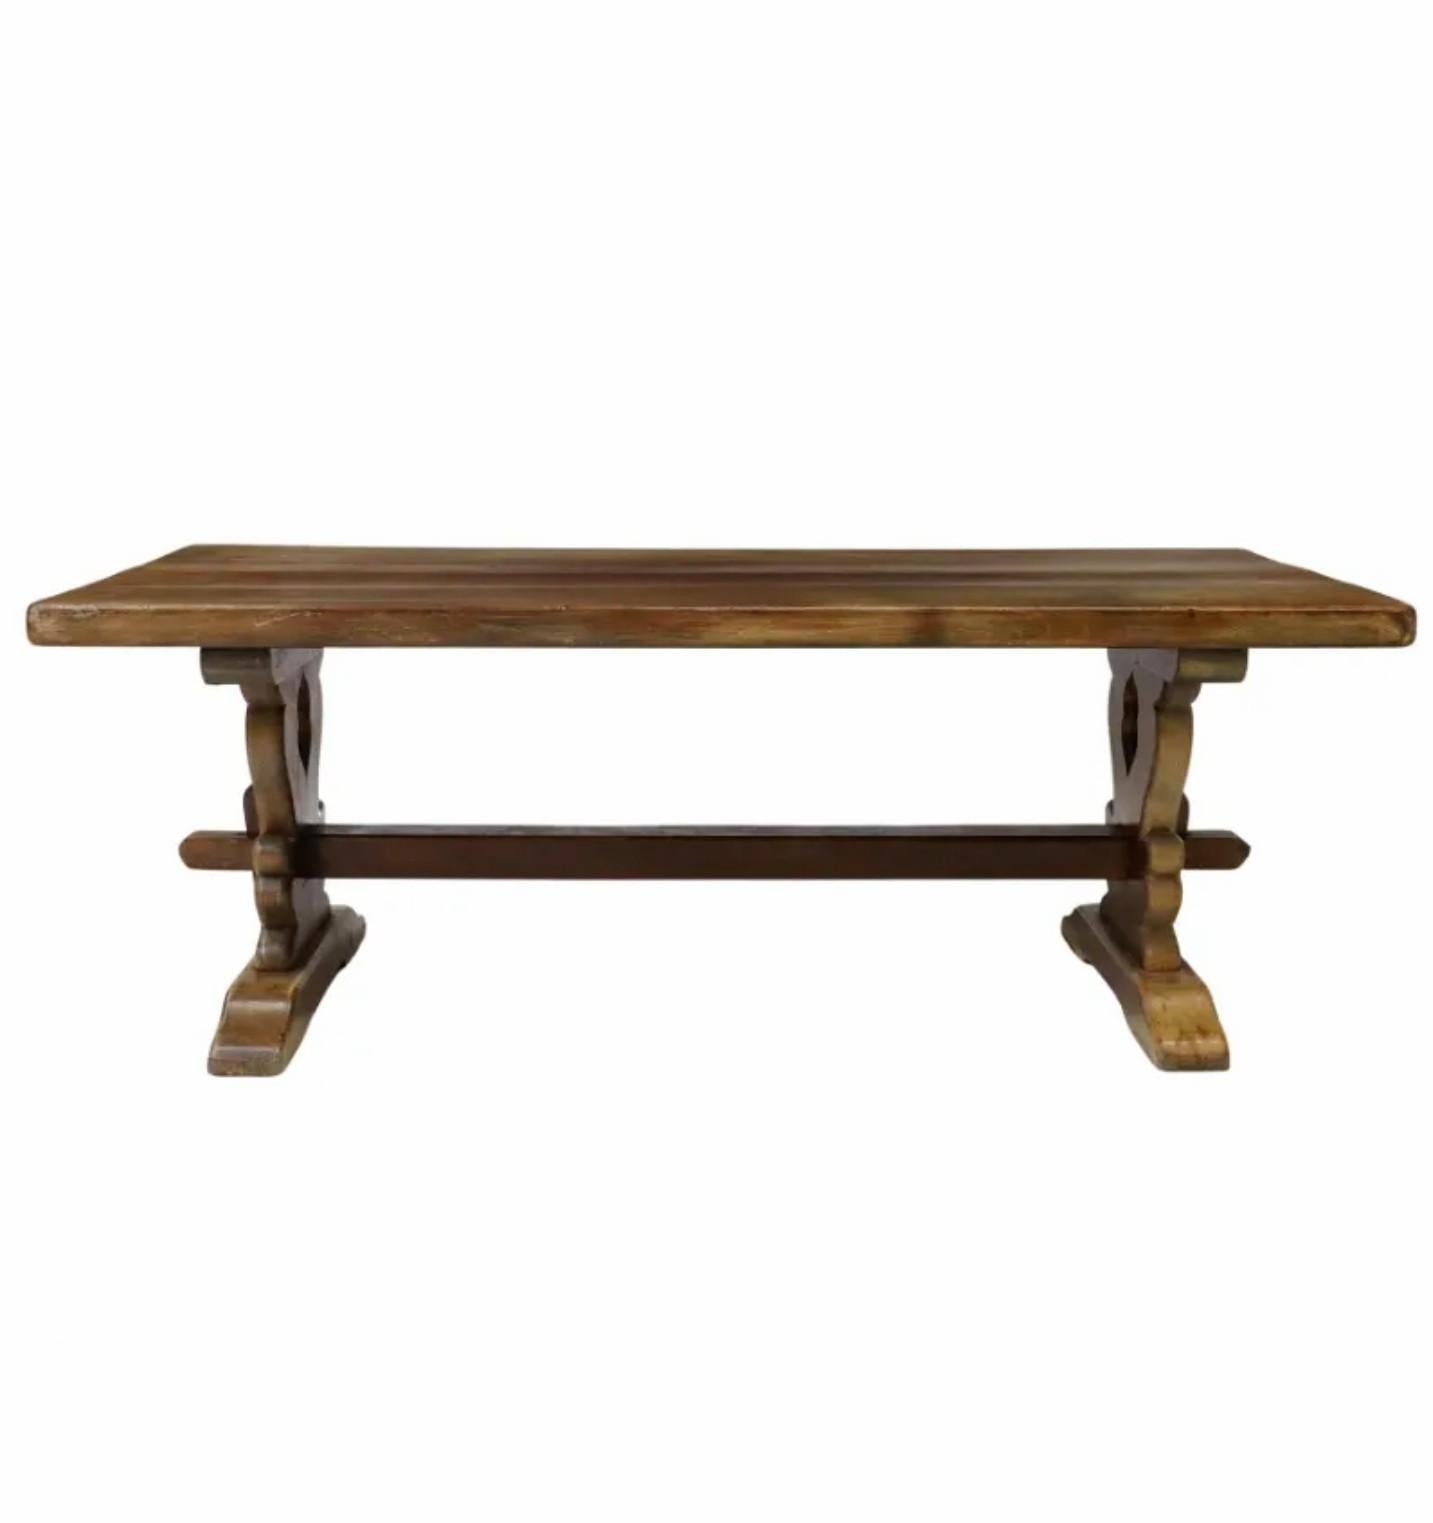 A substantial antique French oak monastery / refectory table. circa 1900

Hand carved in France in the early 20th century, likely near the Alps region of Southern France close to the Italian / Swiss border, having an impressive 2.5 inch thick plank